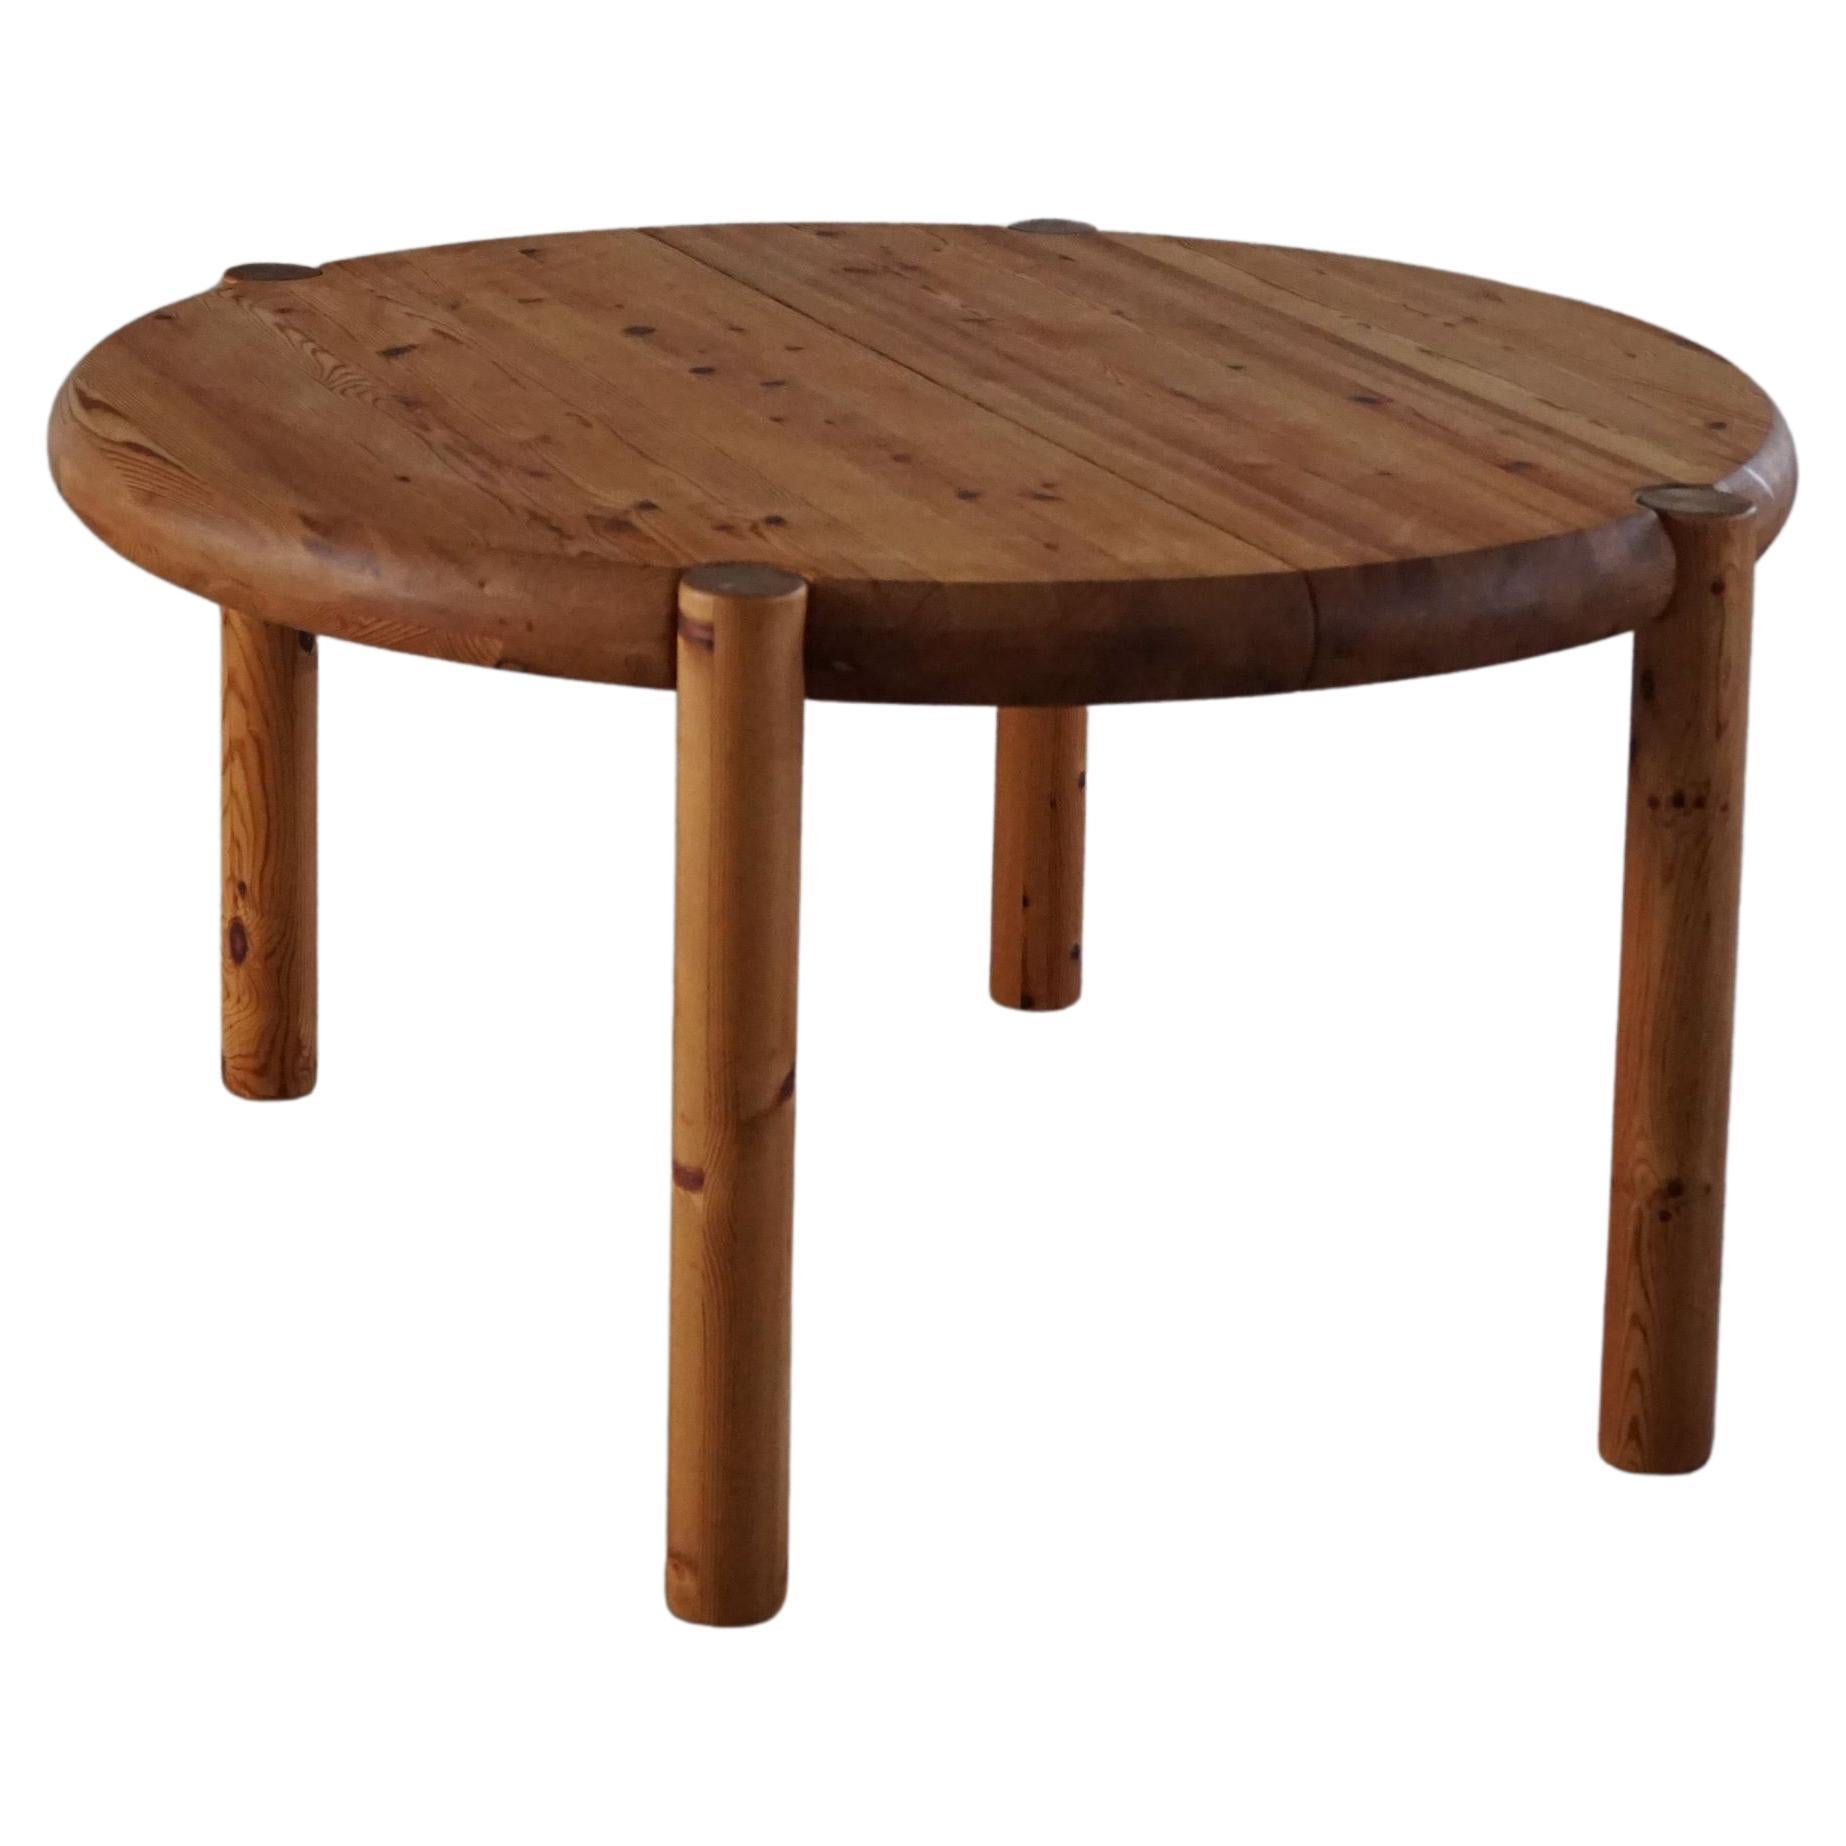 Rainer Daumiller, Extendable Round Dining Table in Pine, Danish Modern, 1970s